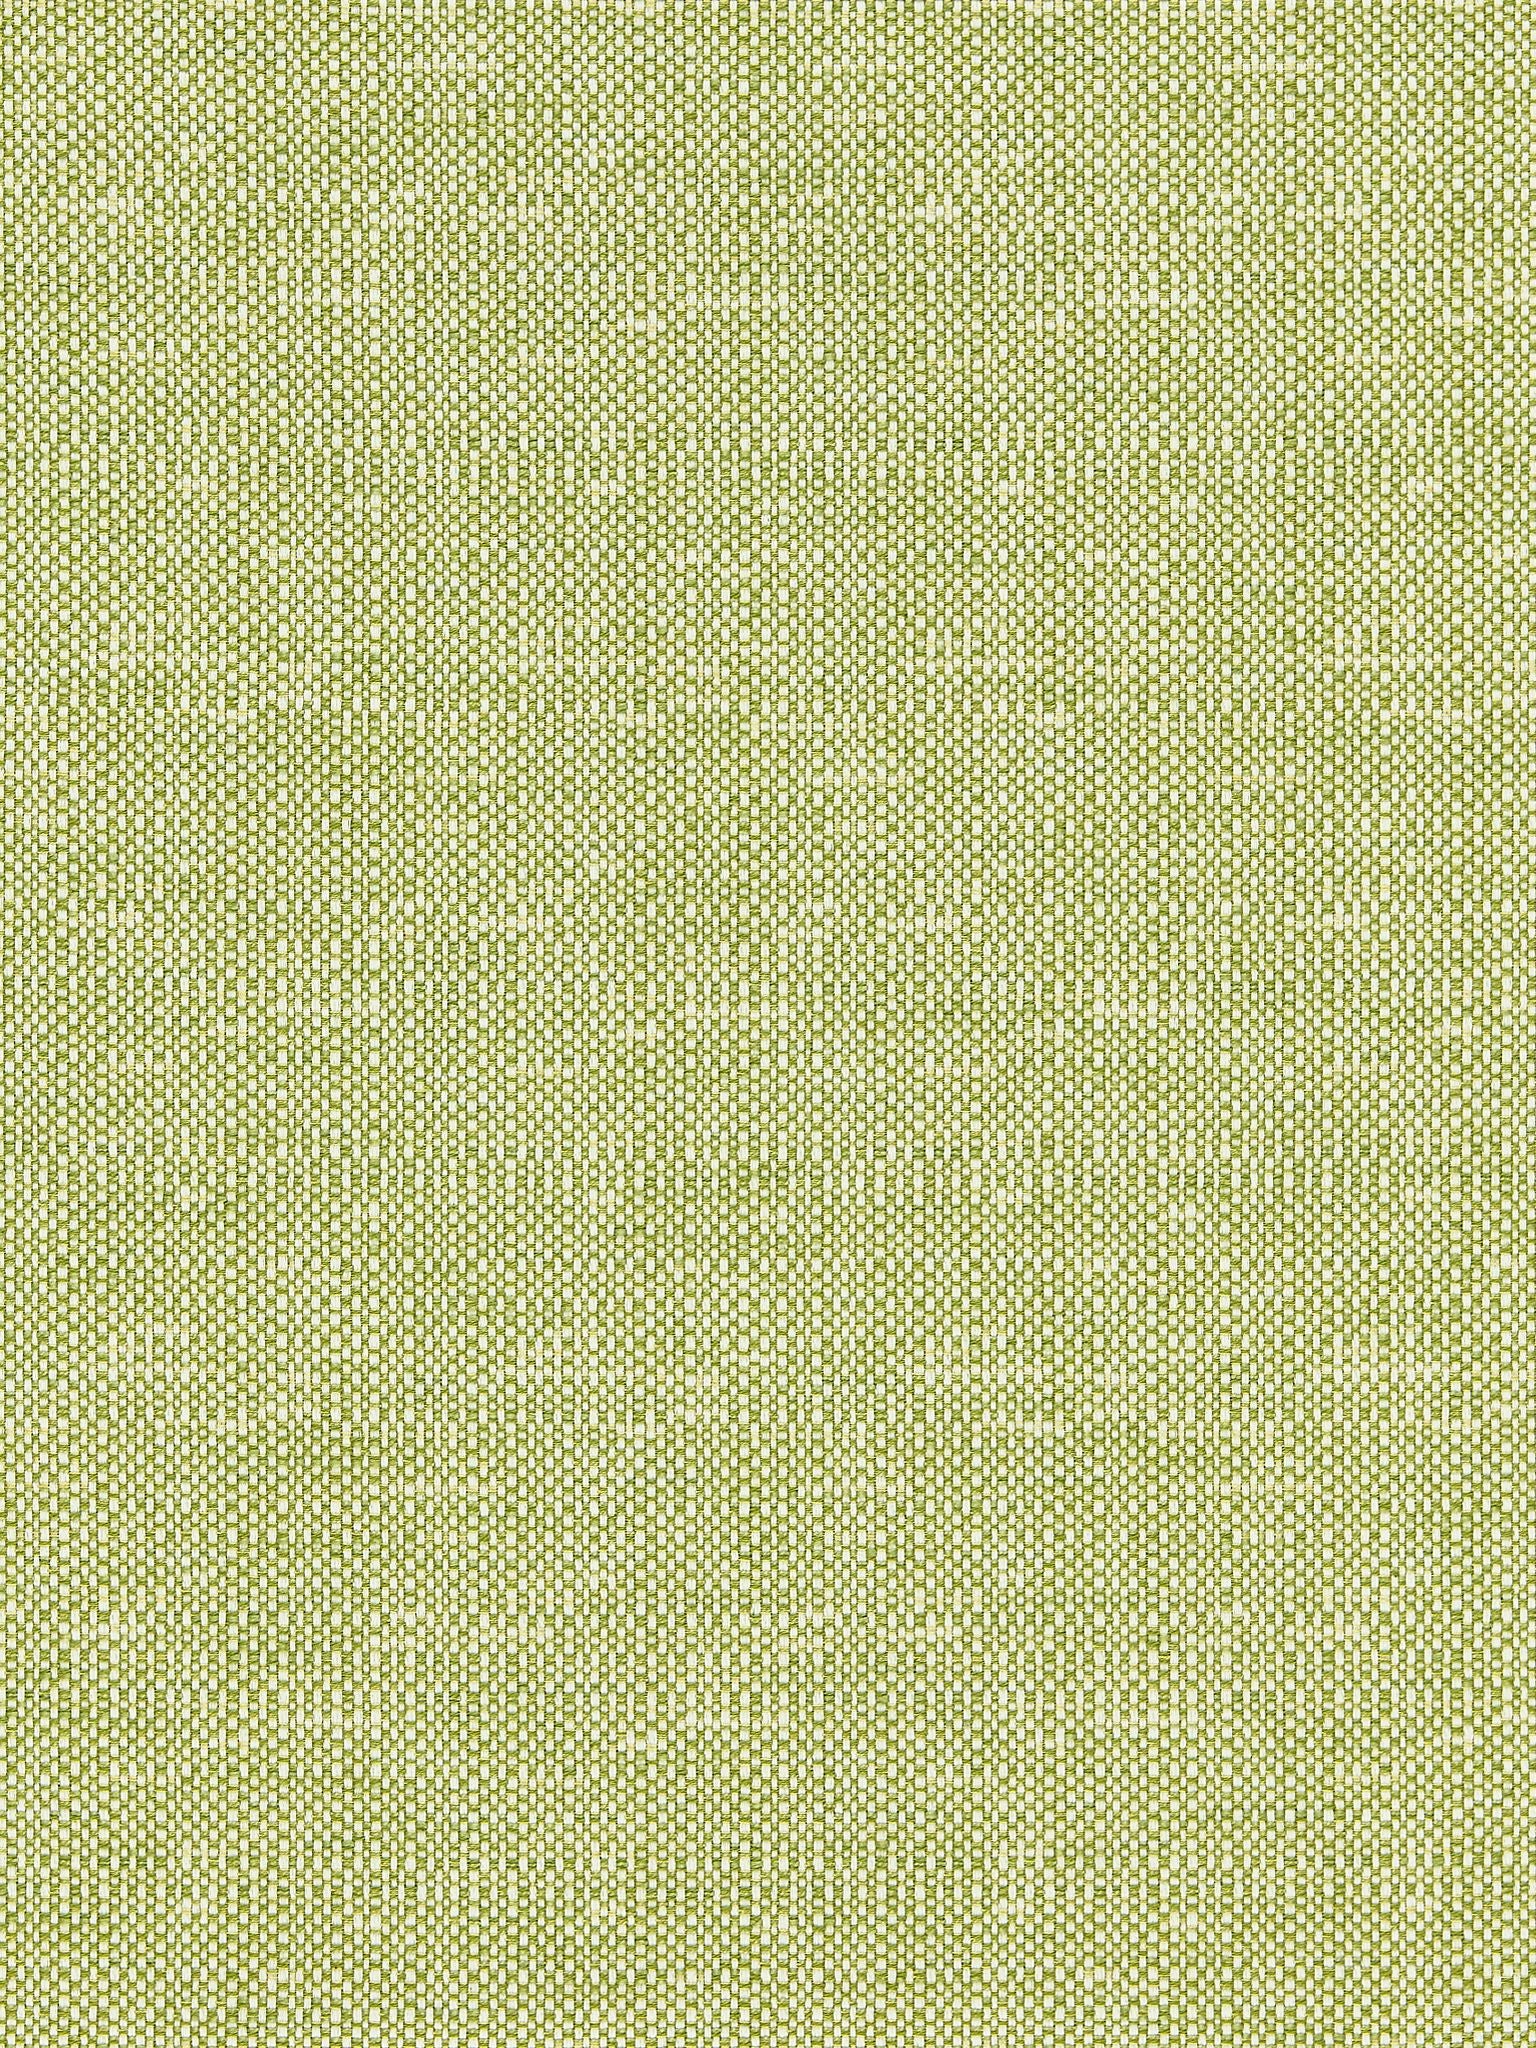 Chester Weave fabric in leaf color - pattern number BK 0004K65118 - by Scalamandre in the Old World Weavers collection